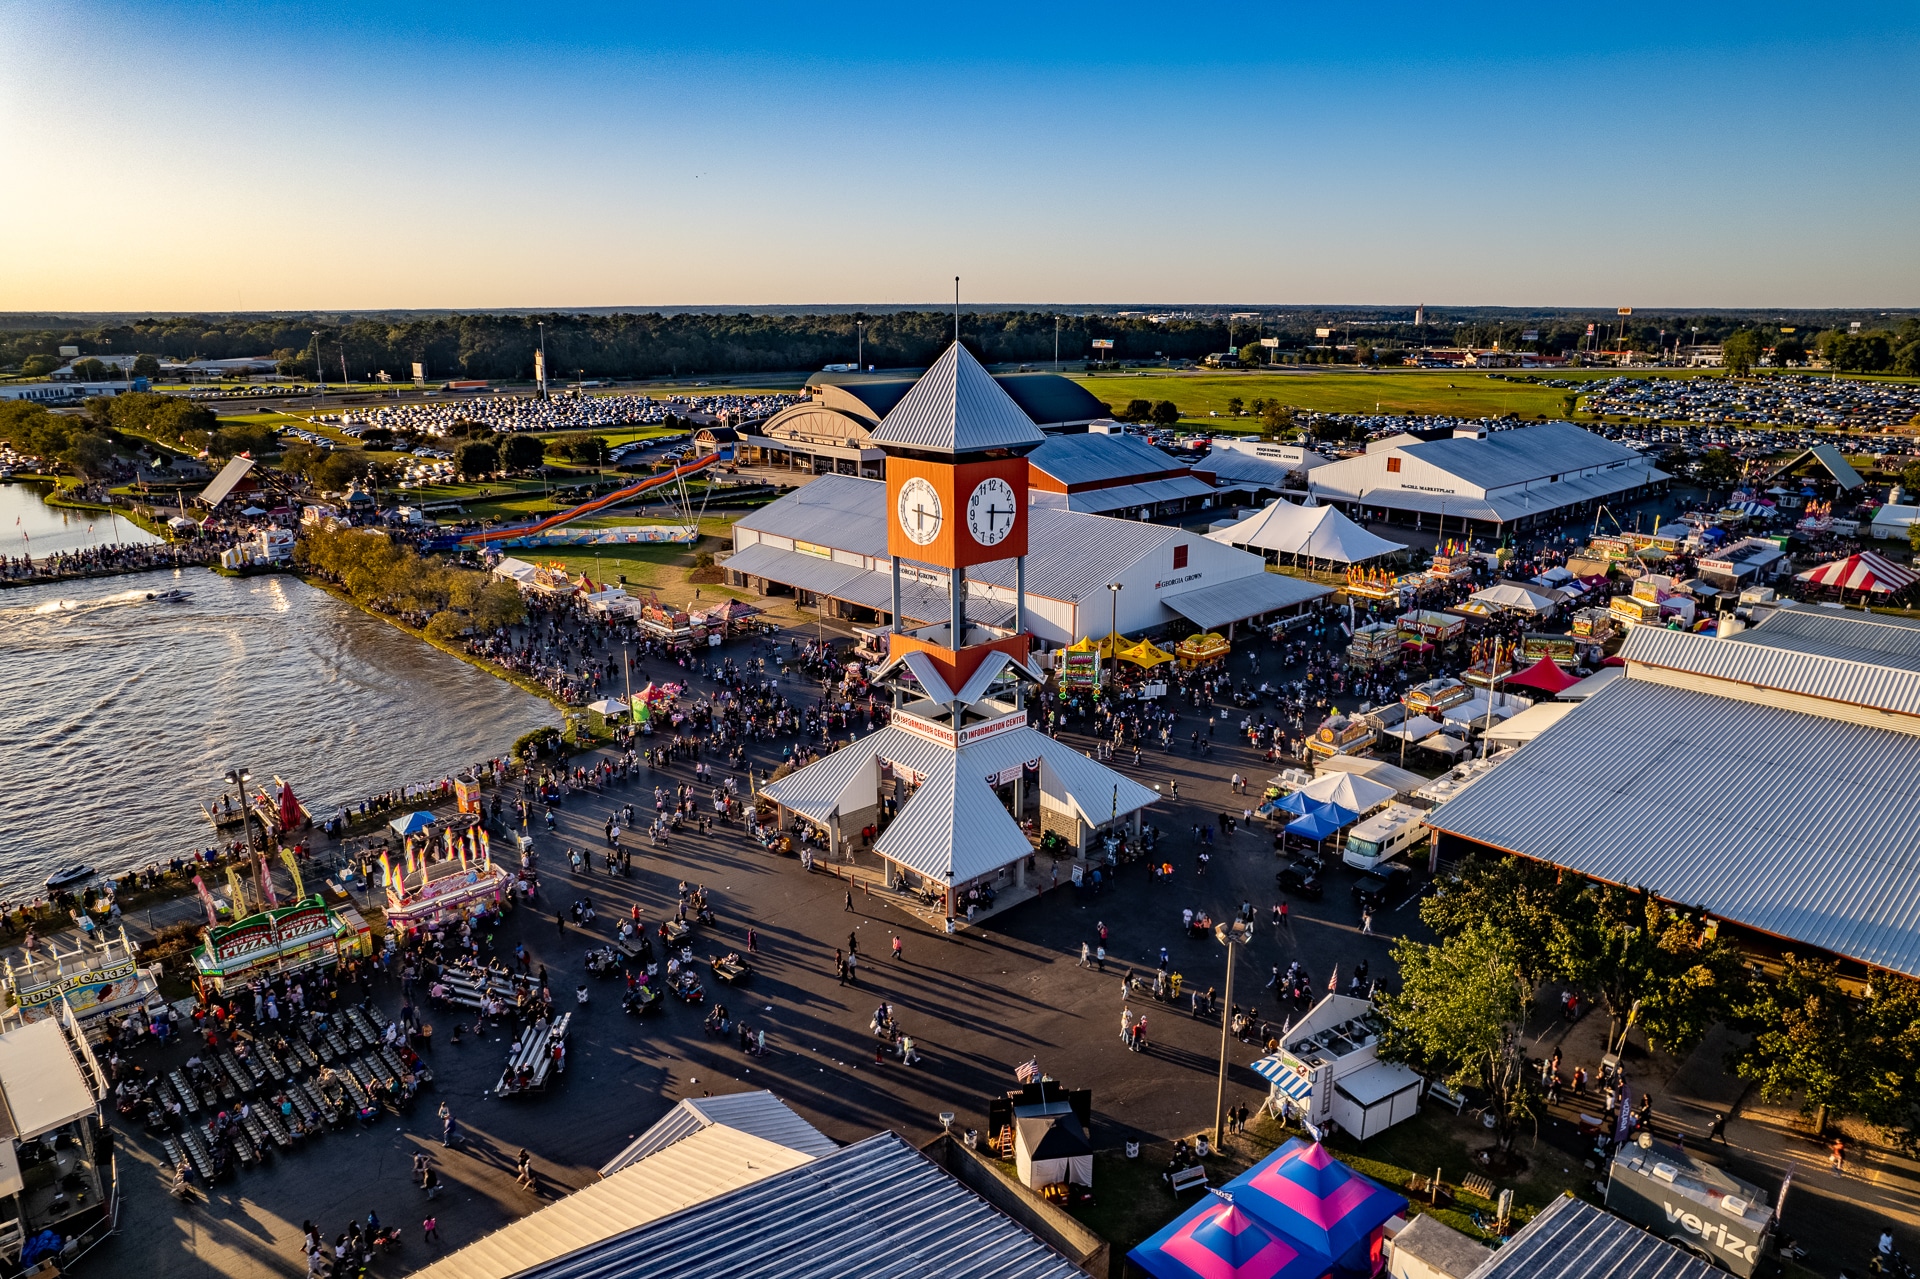 360 Degree Aerial Panoramas of the National Fairgrounds in